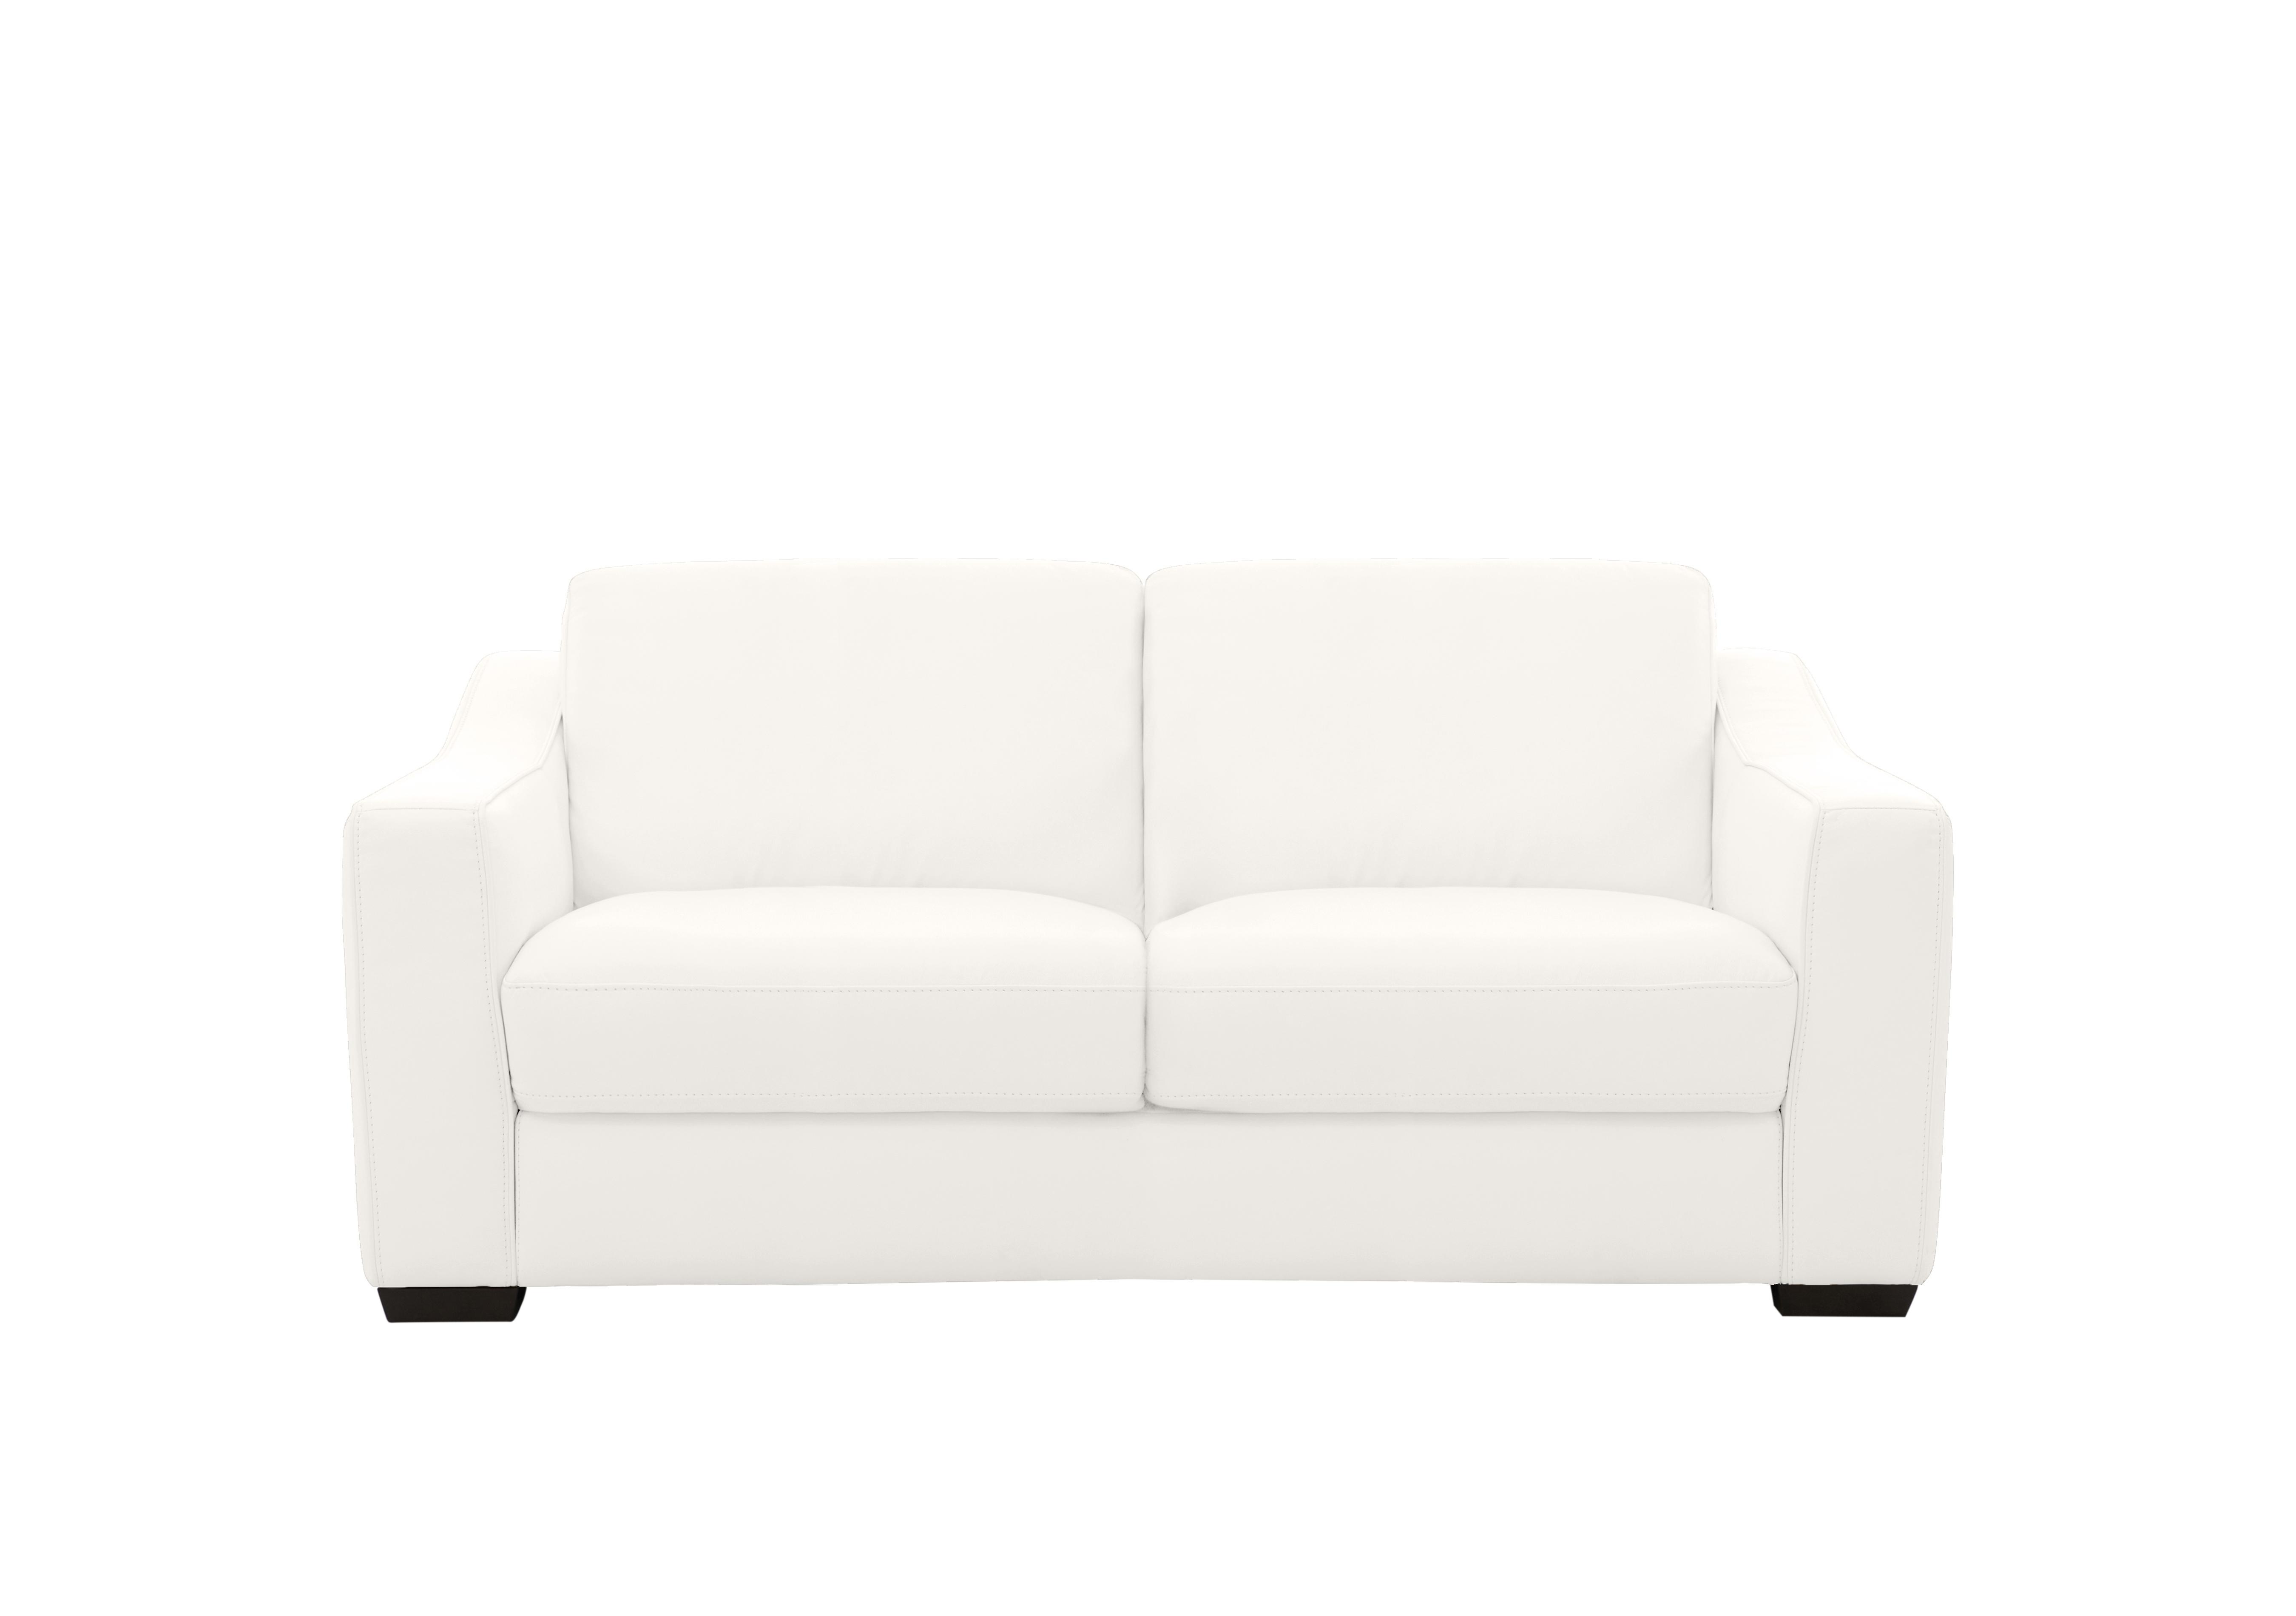 Optimus Space Saving Leather Sofa Bed with Memory Foam Mattress in Bv-744d Star White on Furniture Village